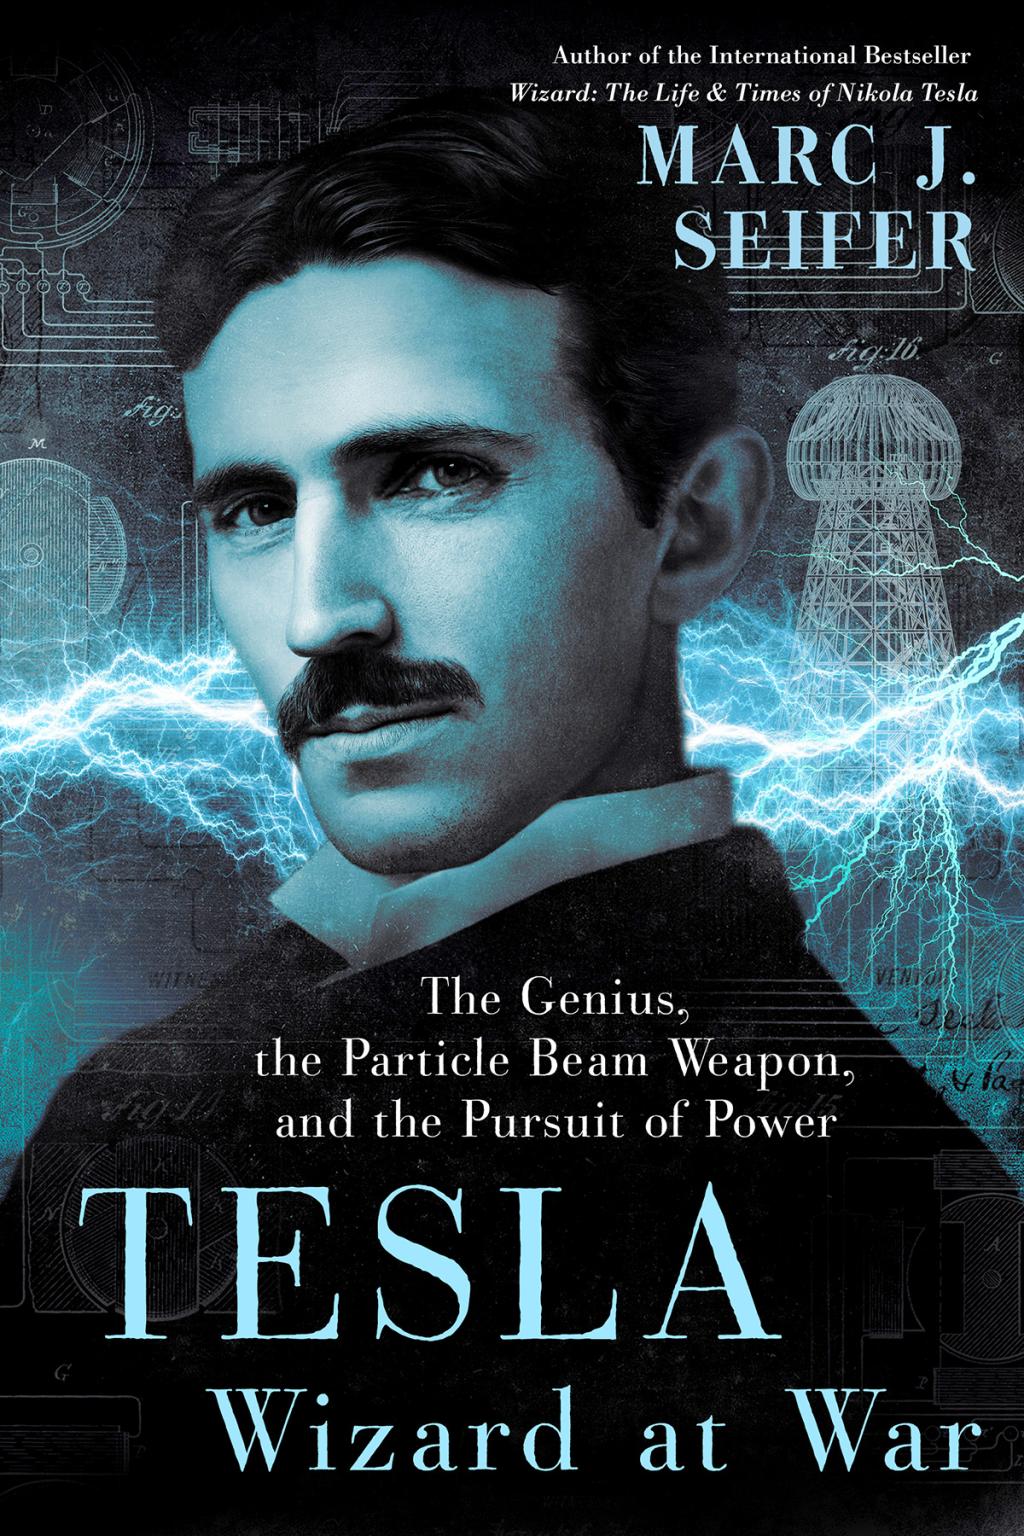 Tesla: Wizard at War - Front cover.